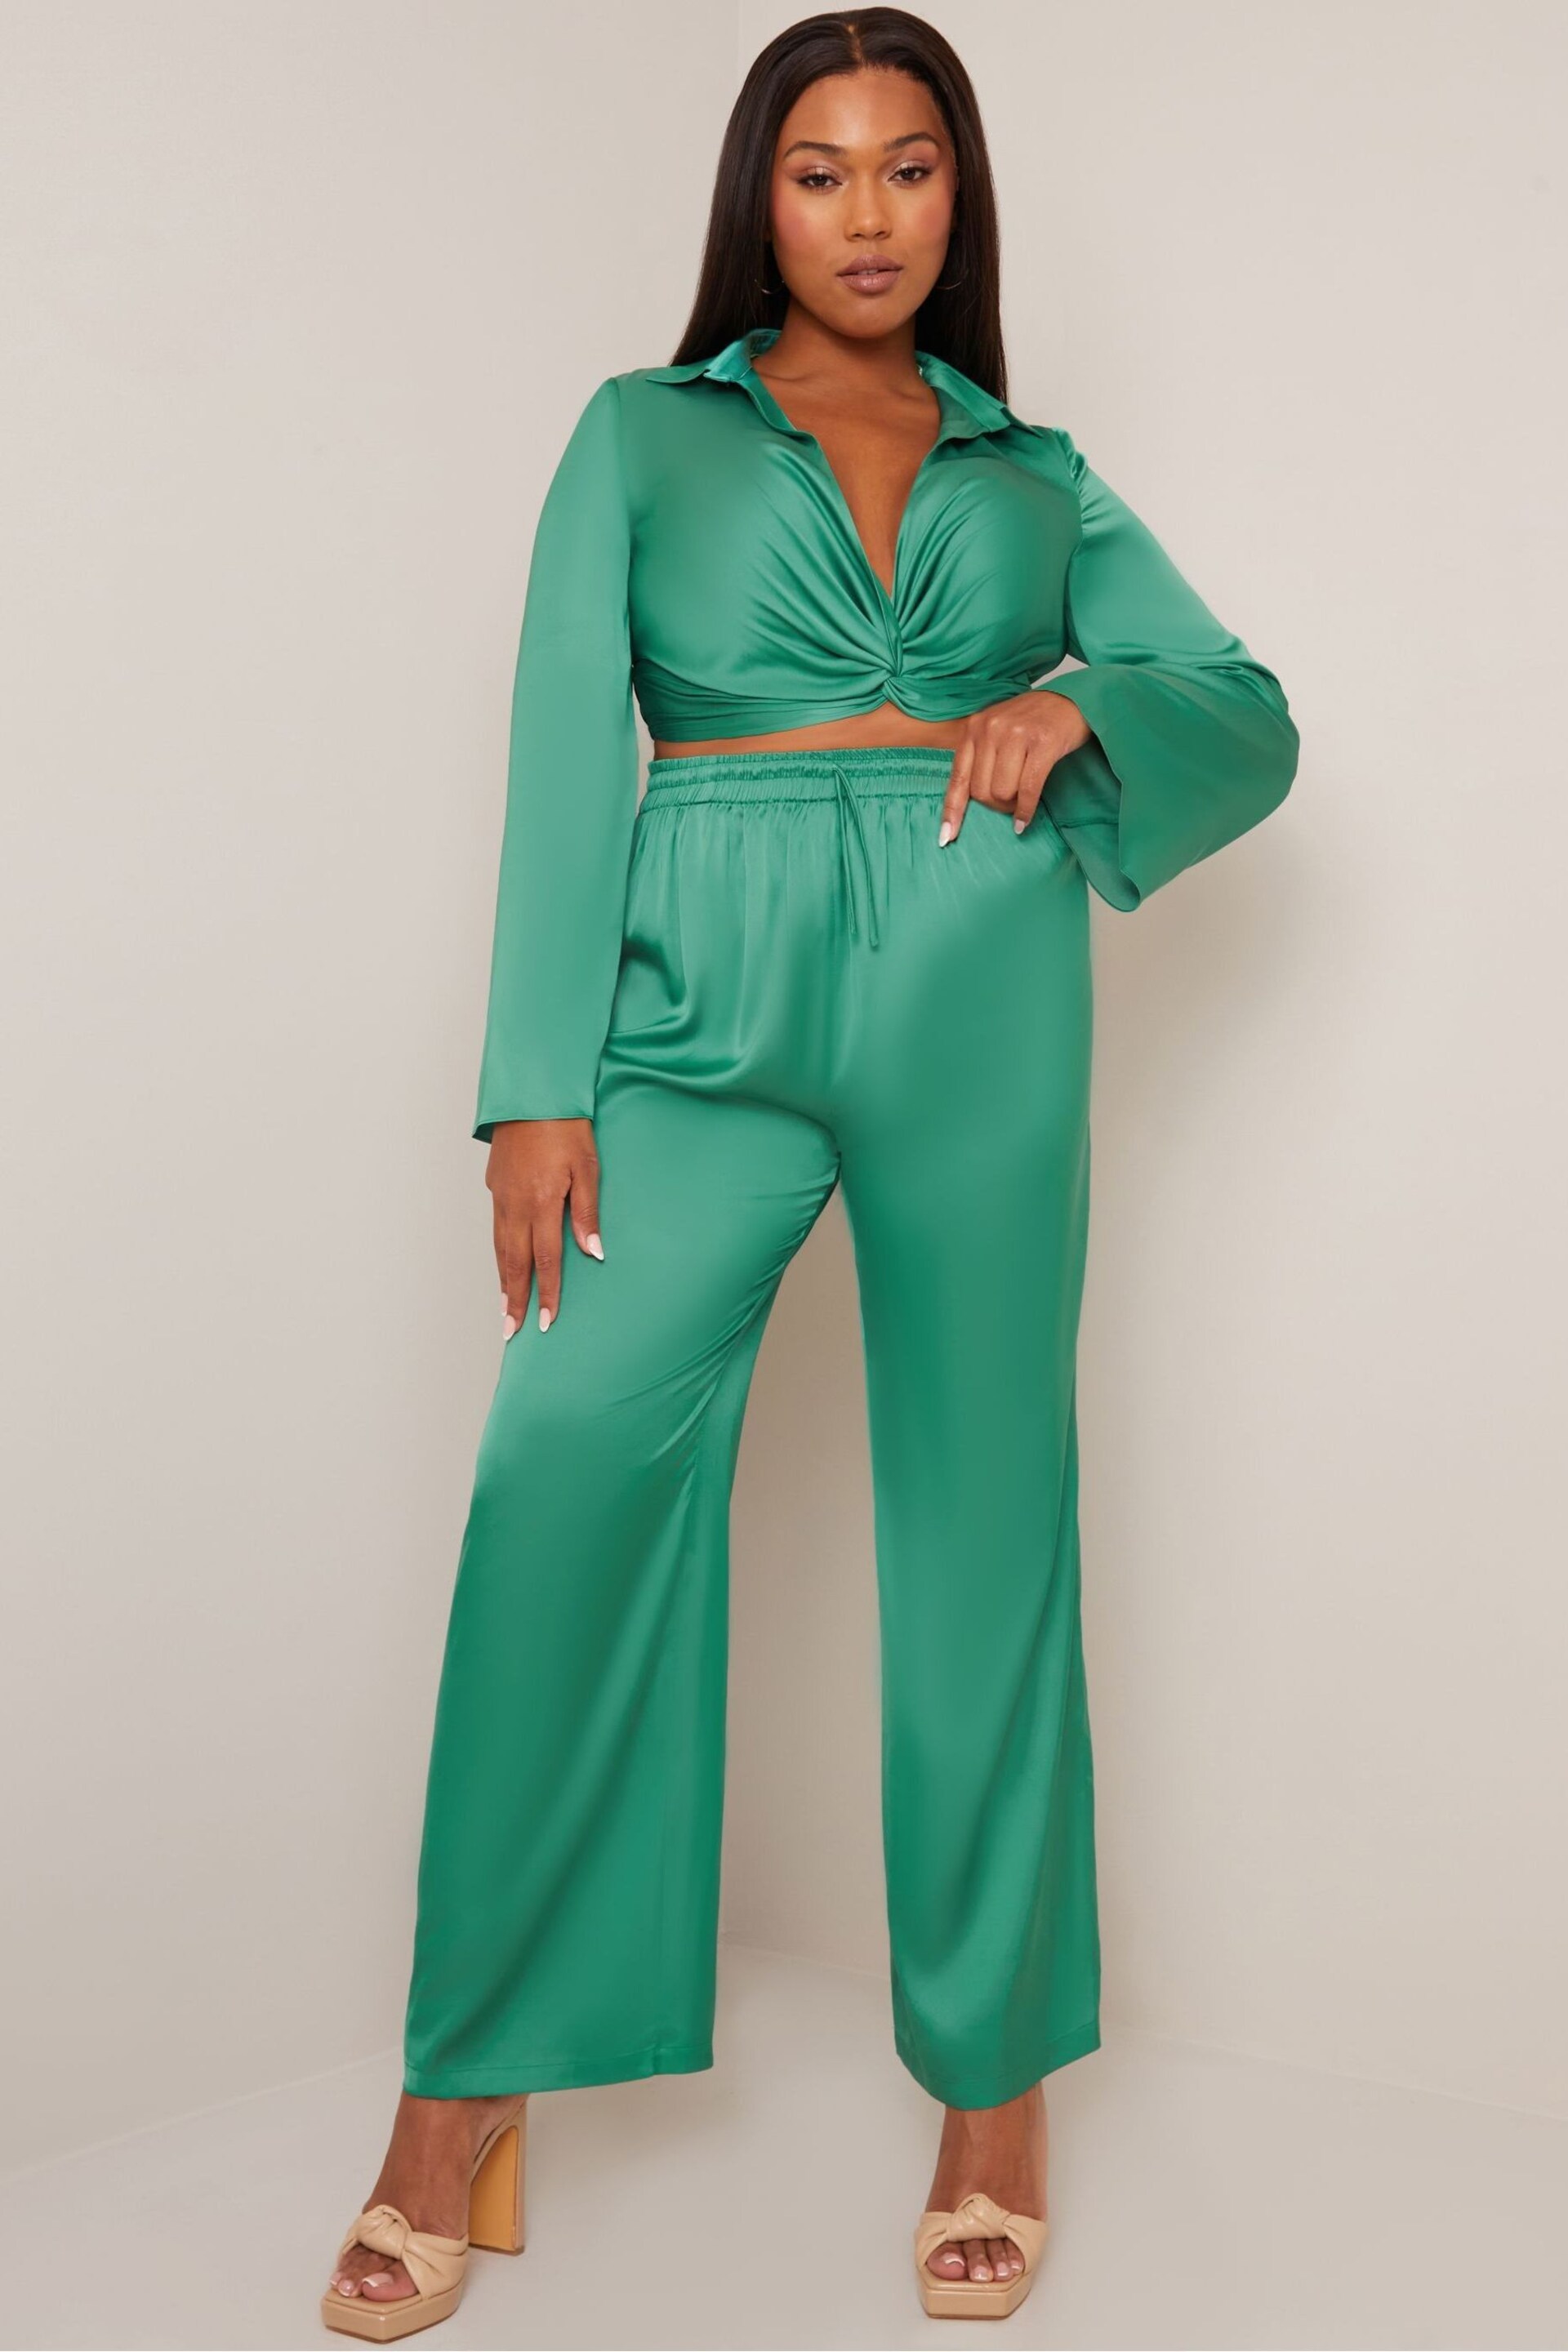 Chi Chi London Green Satin Wide Leg Elasticated Waist Trousers - Image 7 of 10